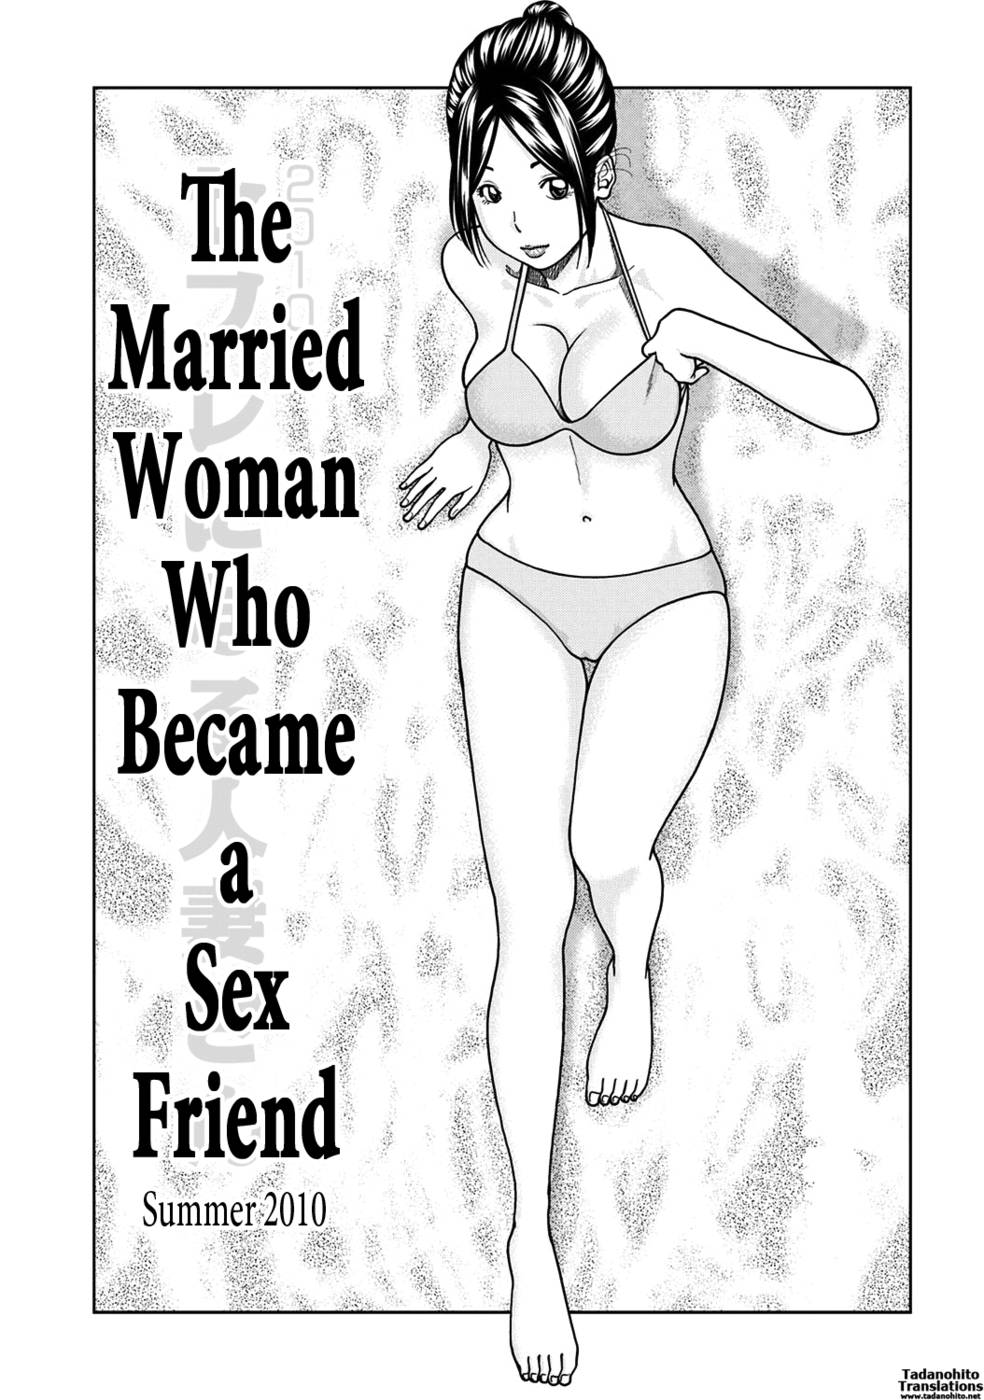 33 Year Old Unsatisfied Wife-Chapter 7-The Married Woman Who Became A Sex Friend-Hentai Manga Hentai Comic pic image